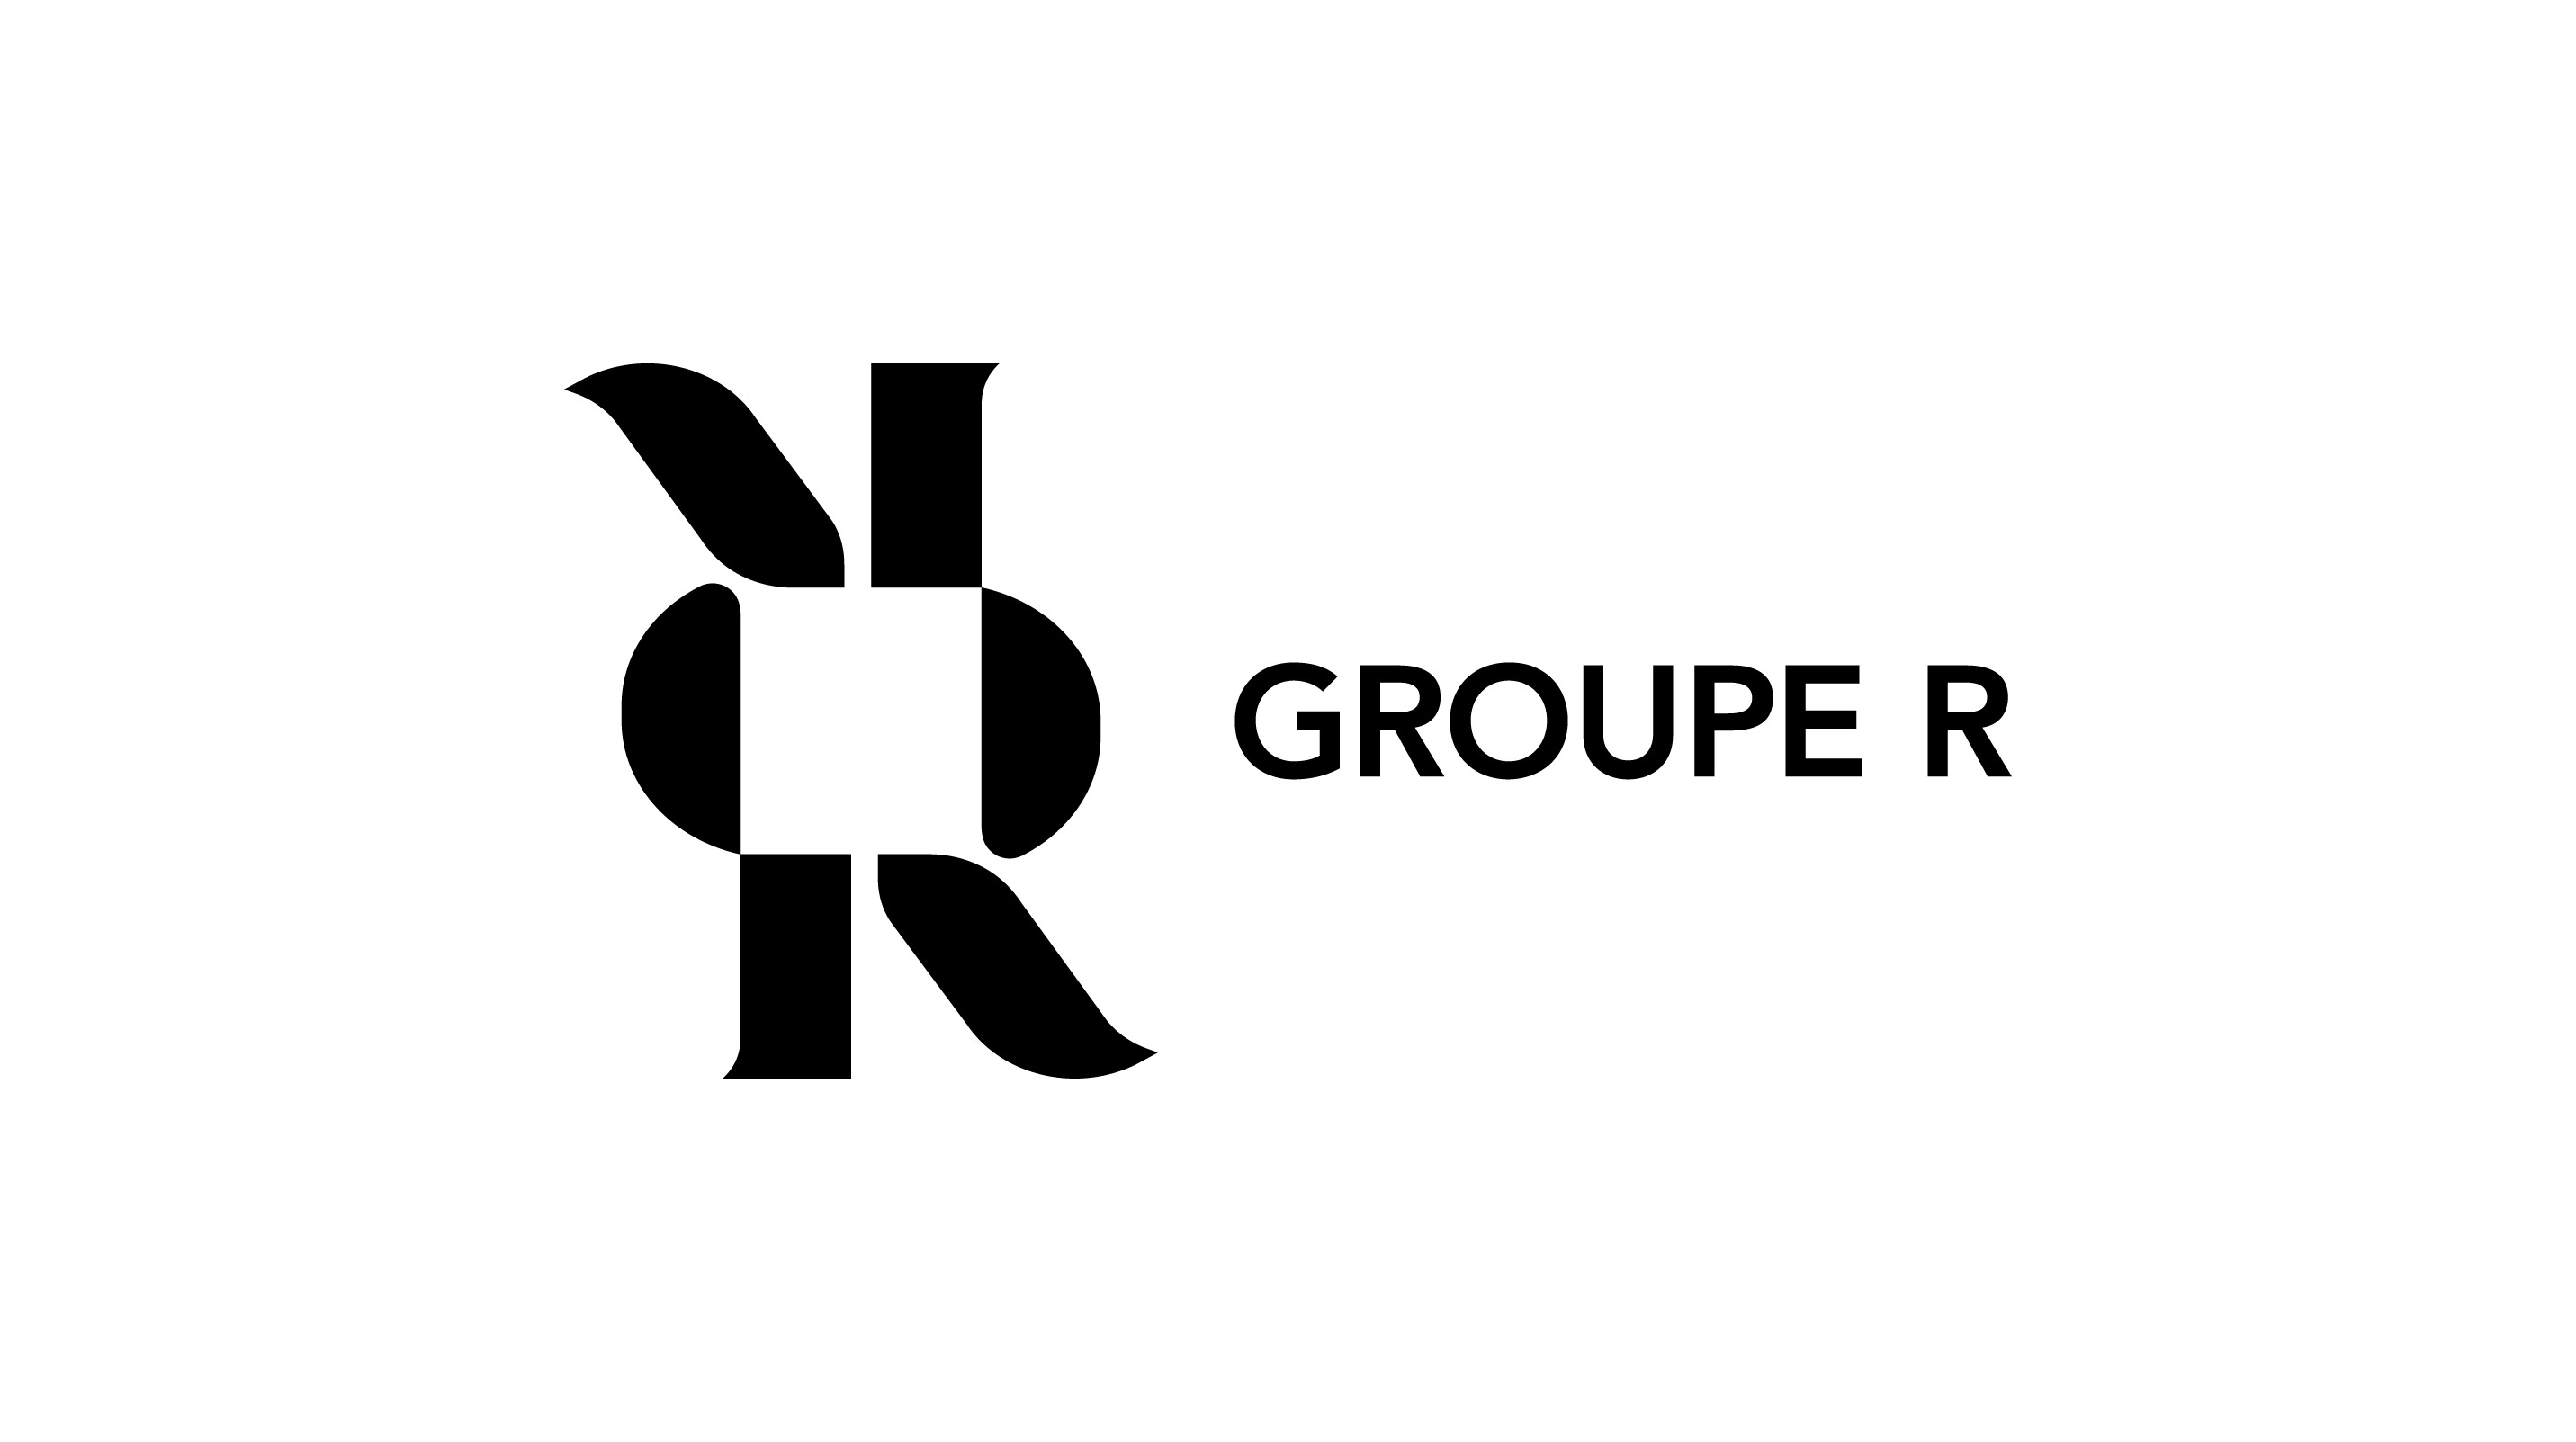 (c) Groupe-r.ch